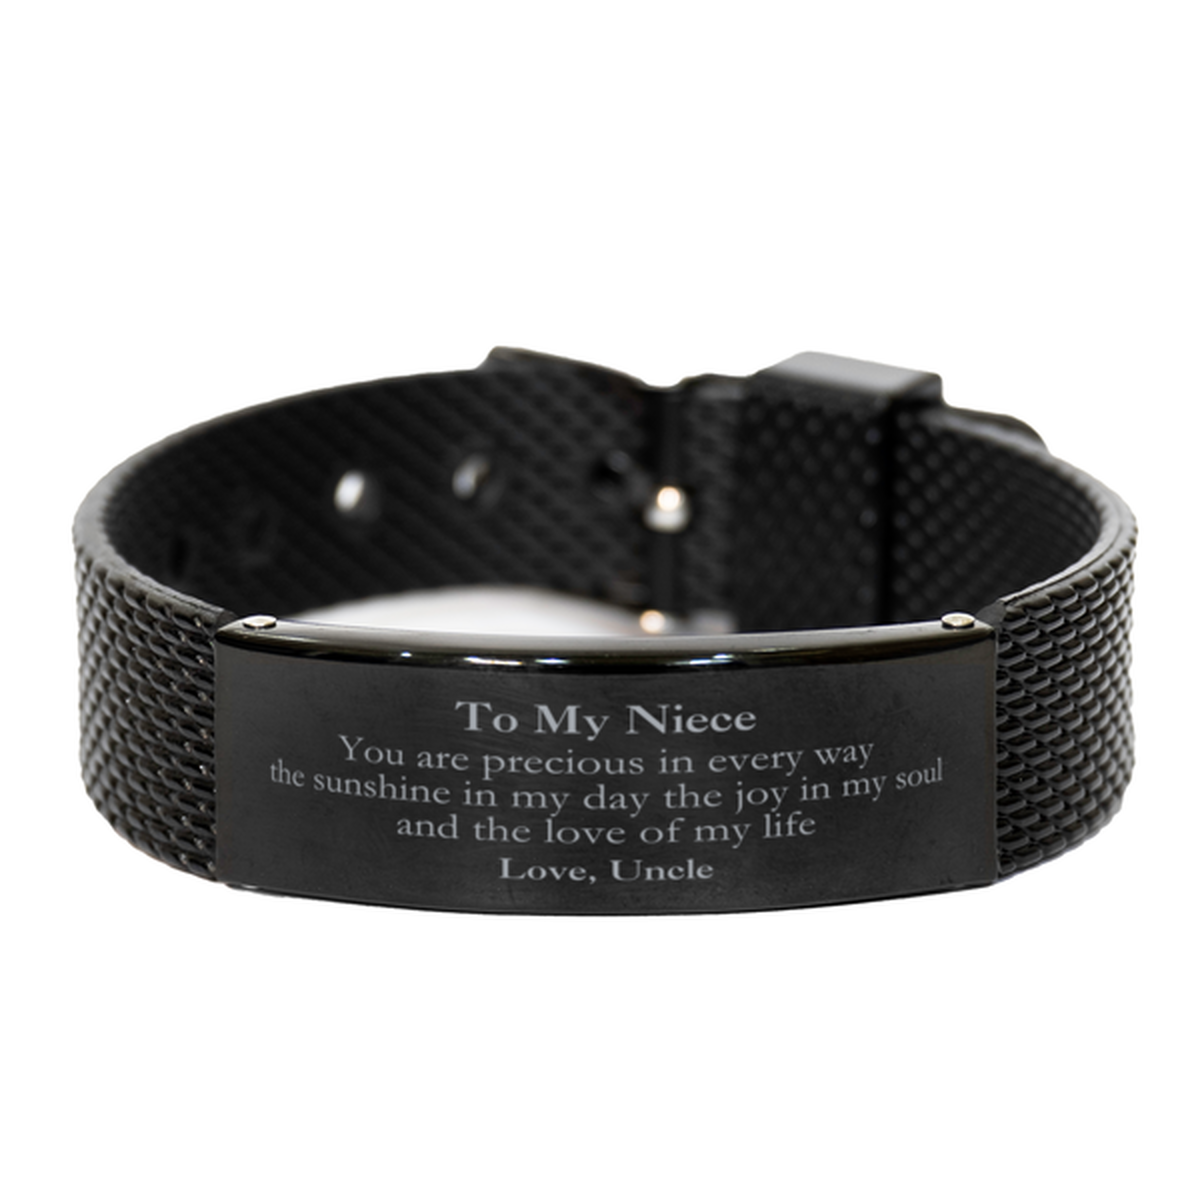 Graduation Gifts for Niece Black Shark Mesh Bracelet Present from Uncle, Christmas Niece Birthday Gifts Niece You are precious in every way the sunshine in my day. Love, Uncle